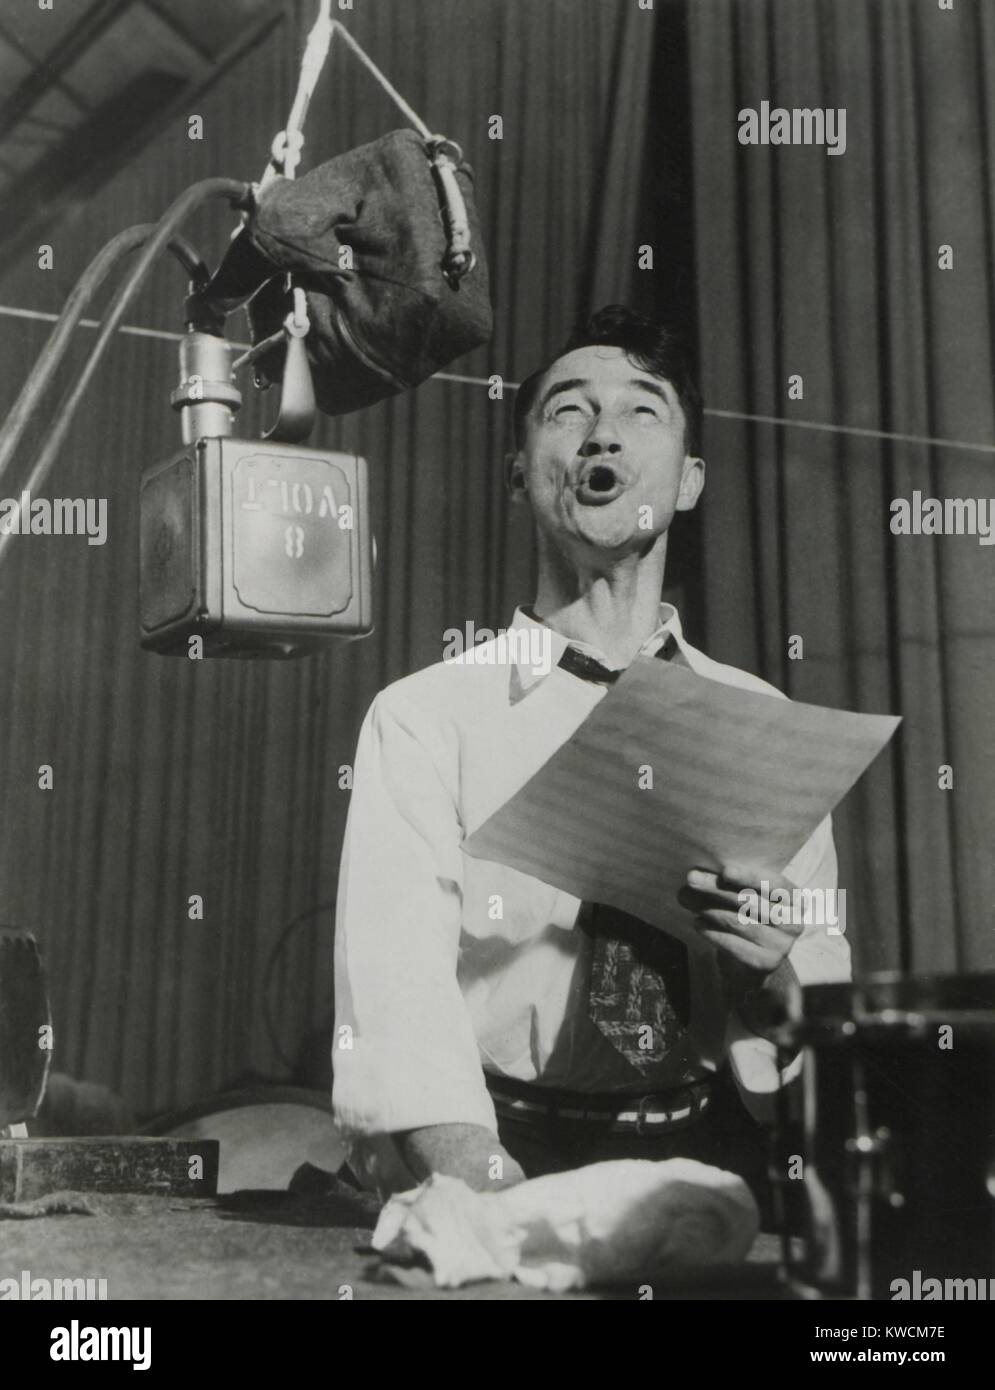 Pinto Colvig in Walt Disney studios creating sounds for an animated film in the 1930s. The American vaudeville actor became a movie voice actor who worked with the major Hollywood studios. He created the voice of Disney's 'Goofy', and voiced 'Grumpy' in SNOW WHITE AND THE SEVEN DWARFS. - (BSLOC 2014 14 3) Stock Photo